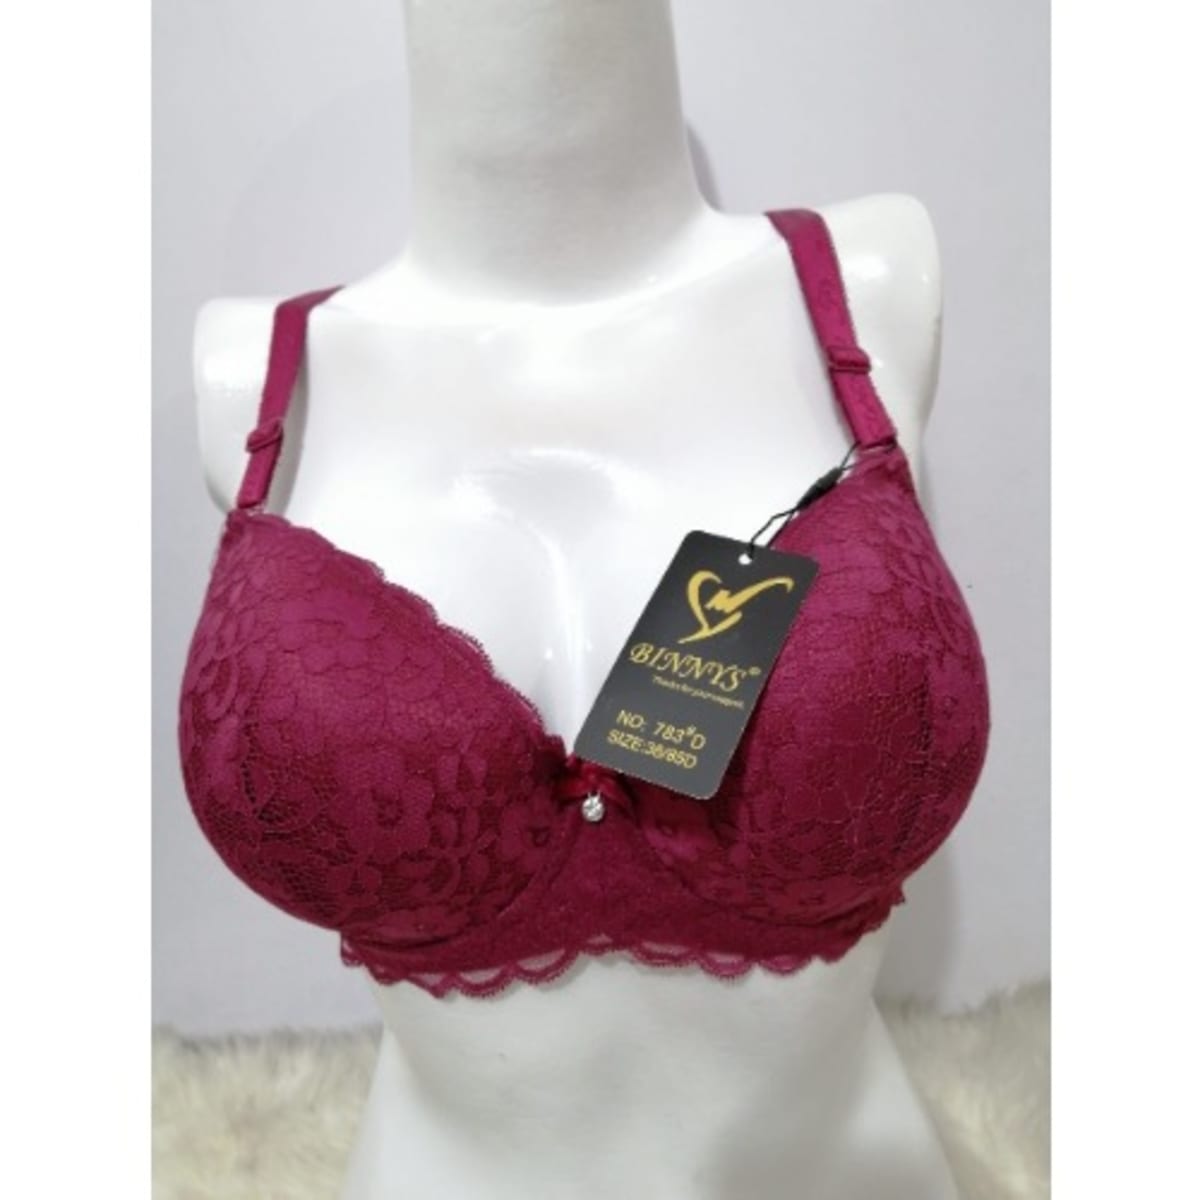 Binnys Sexiest Floral Lace Bras (Cap C&D)  AfricaSokoni :: Redefining  Shopping in Africa